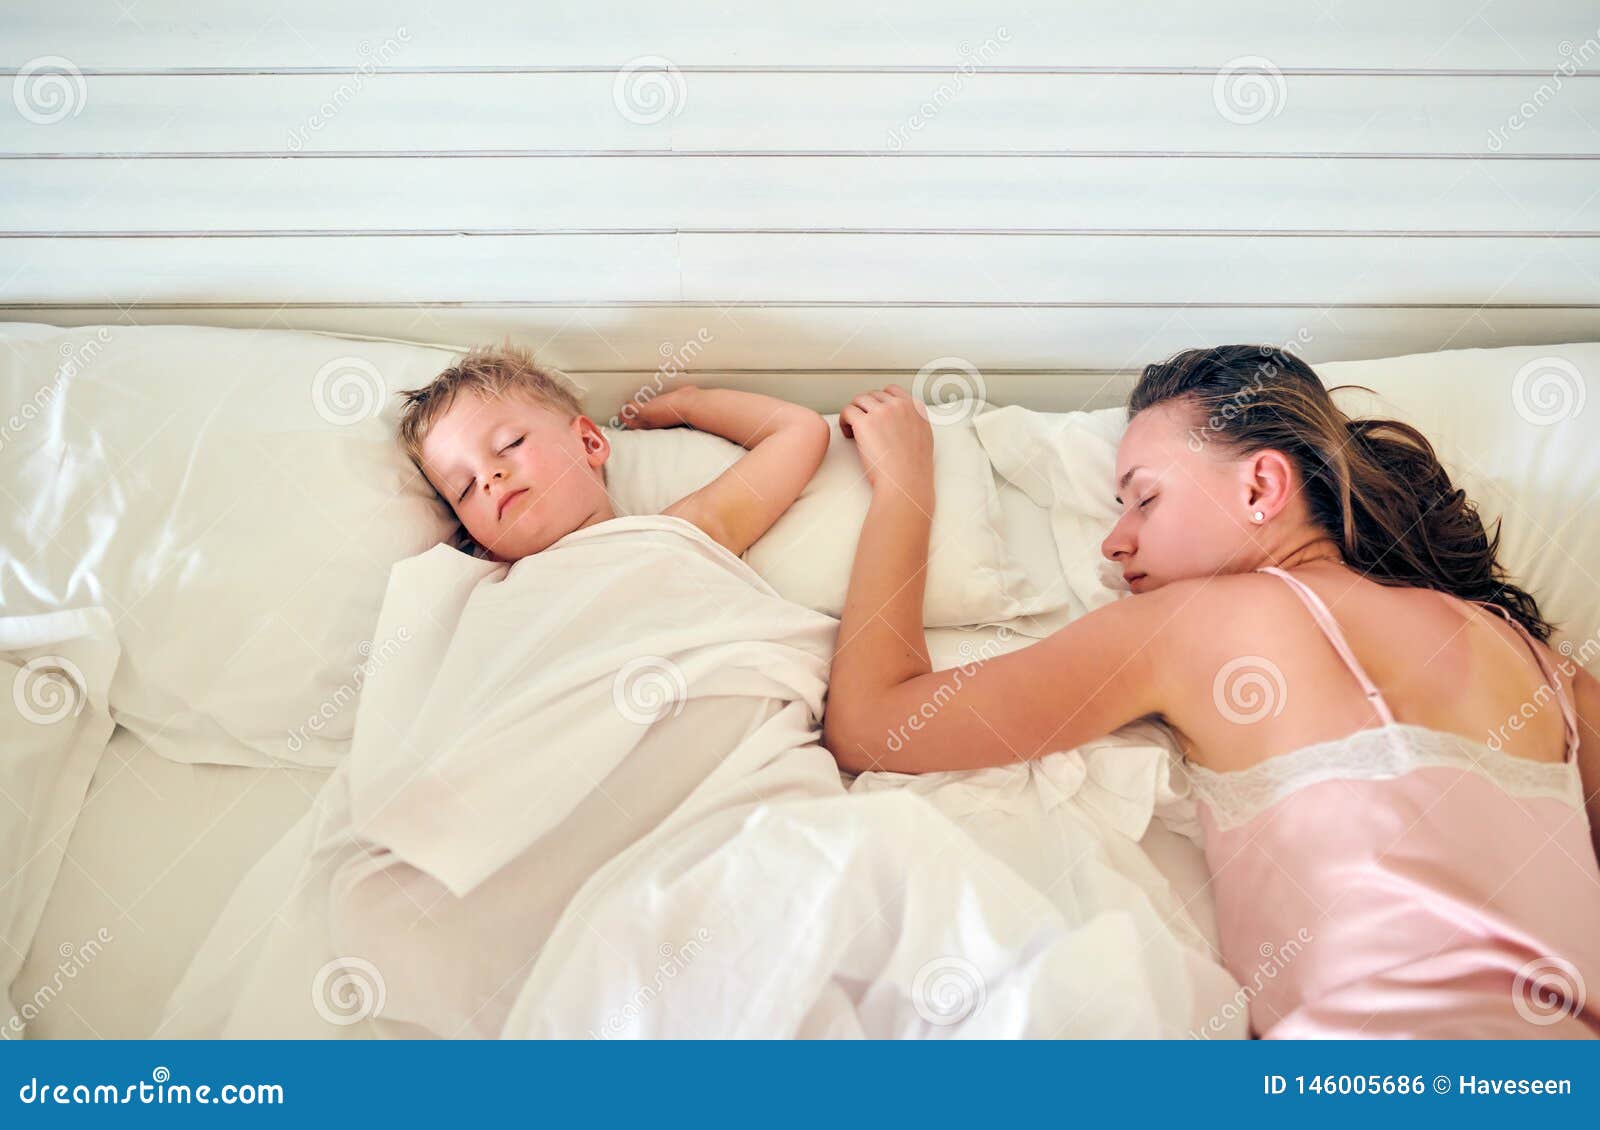 Toddler Boy Sleeping On Pillow With Mother Stock Photo Image Of Cute